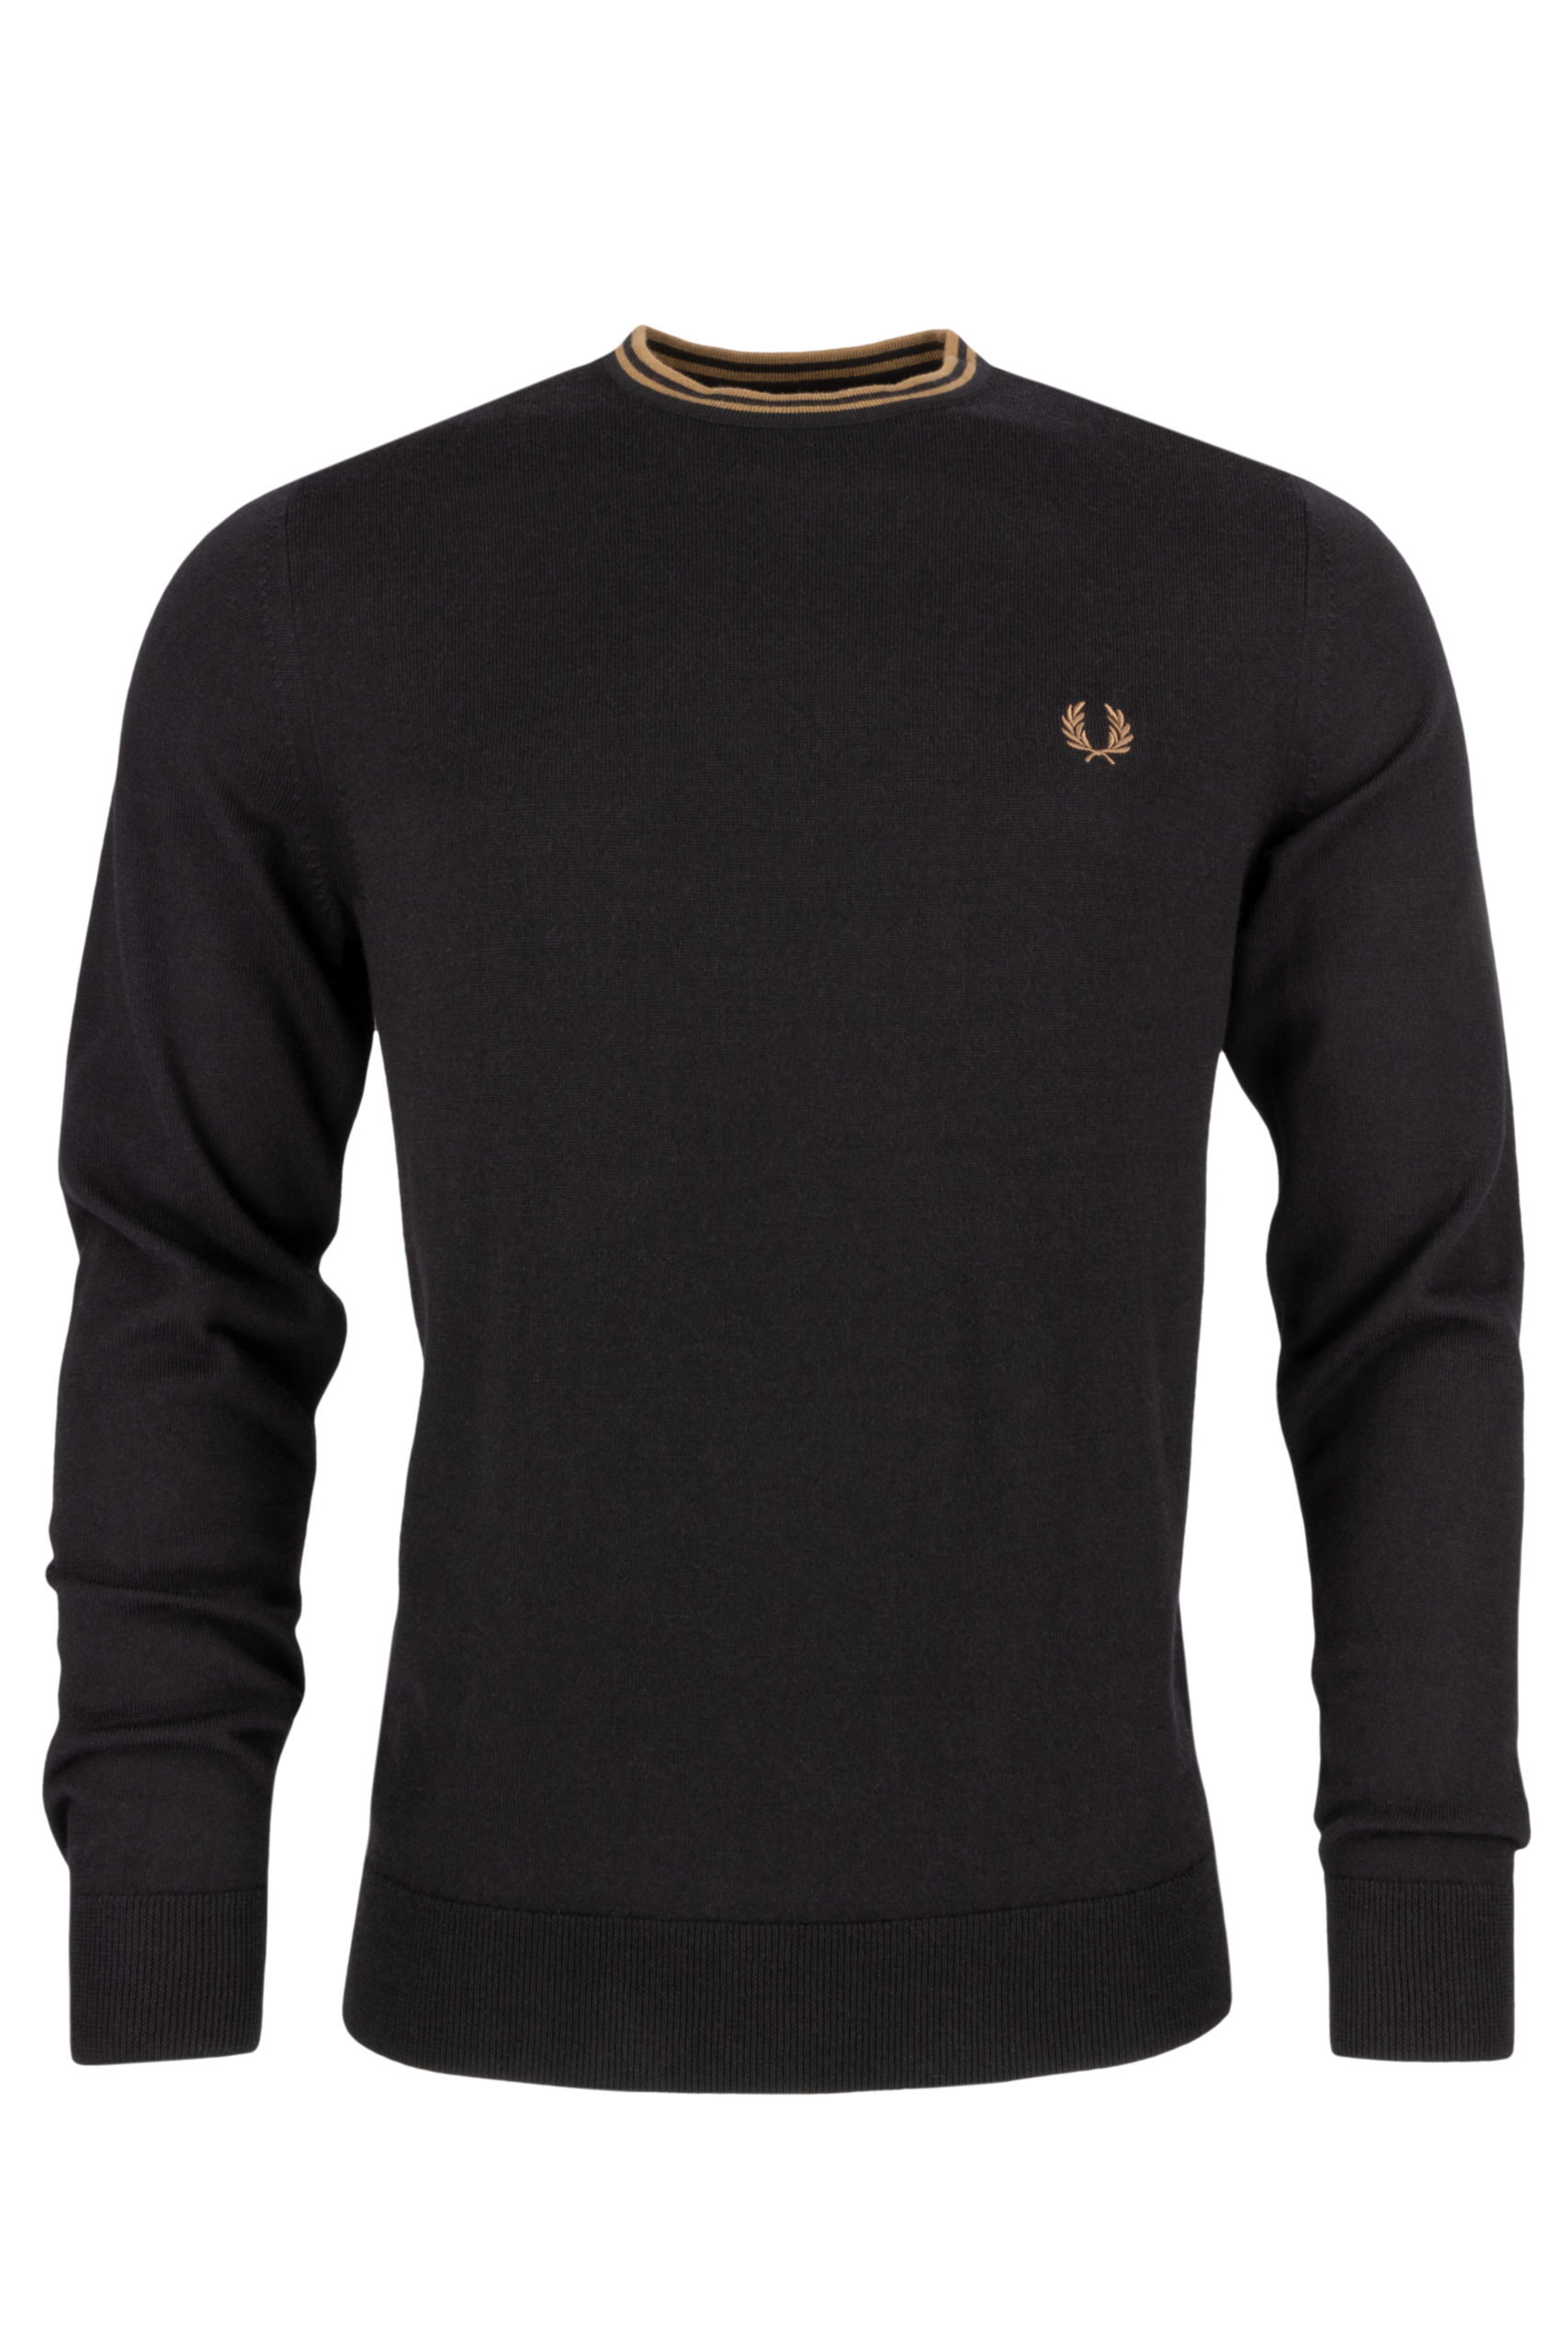 FRED PERRY - CLASSIC CREW NECK JUMPER K9601 | Baccus